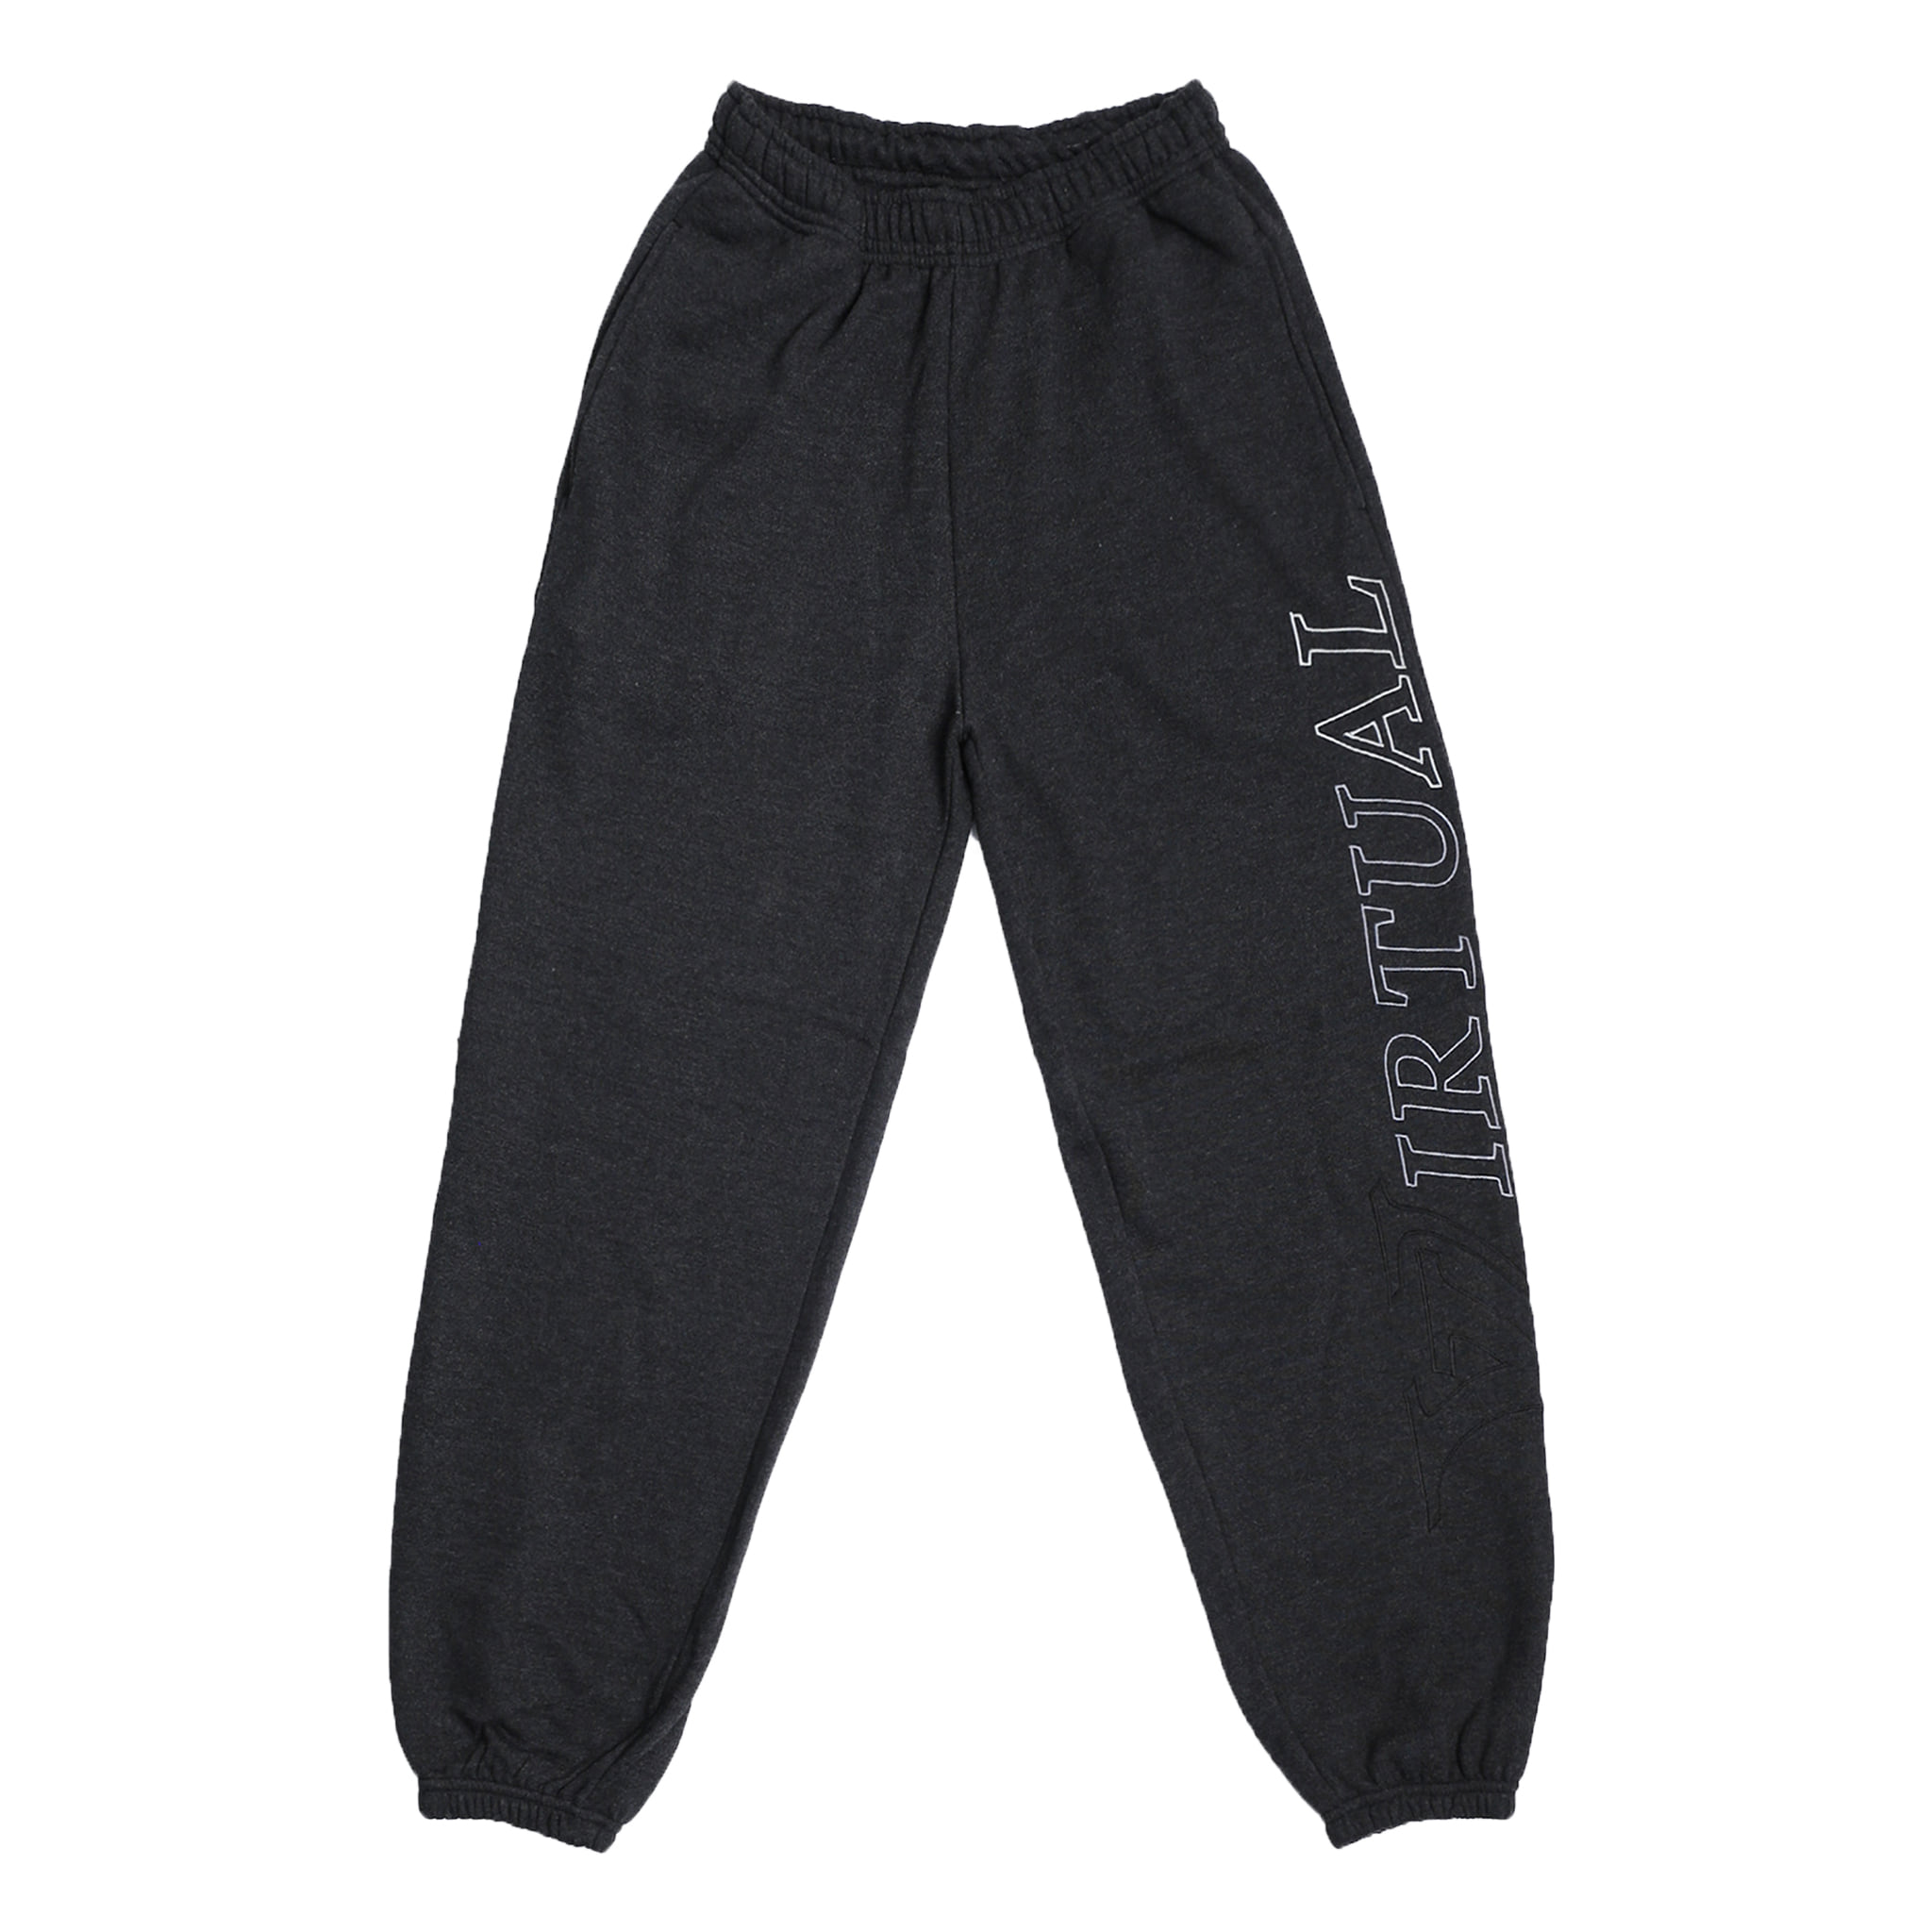 TUEWID Virtual Lover Sweatpants in Standard fit Charcoal